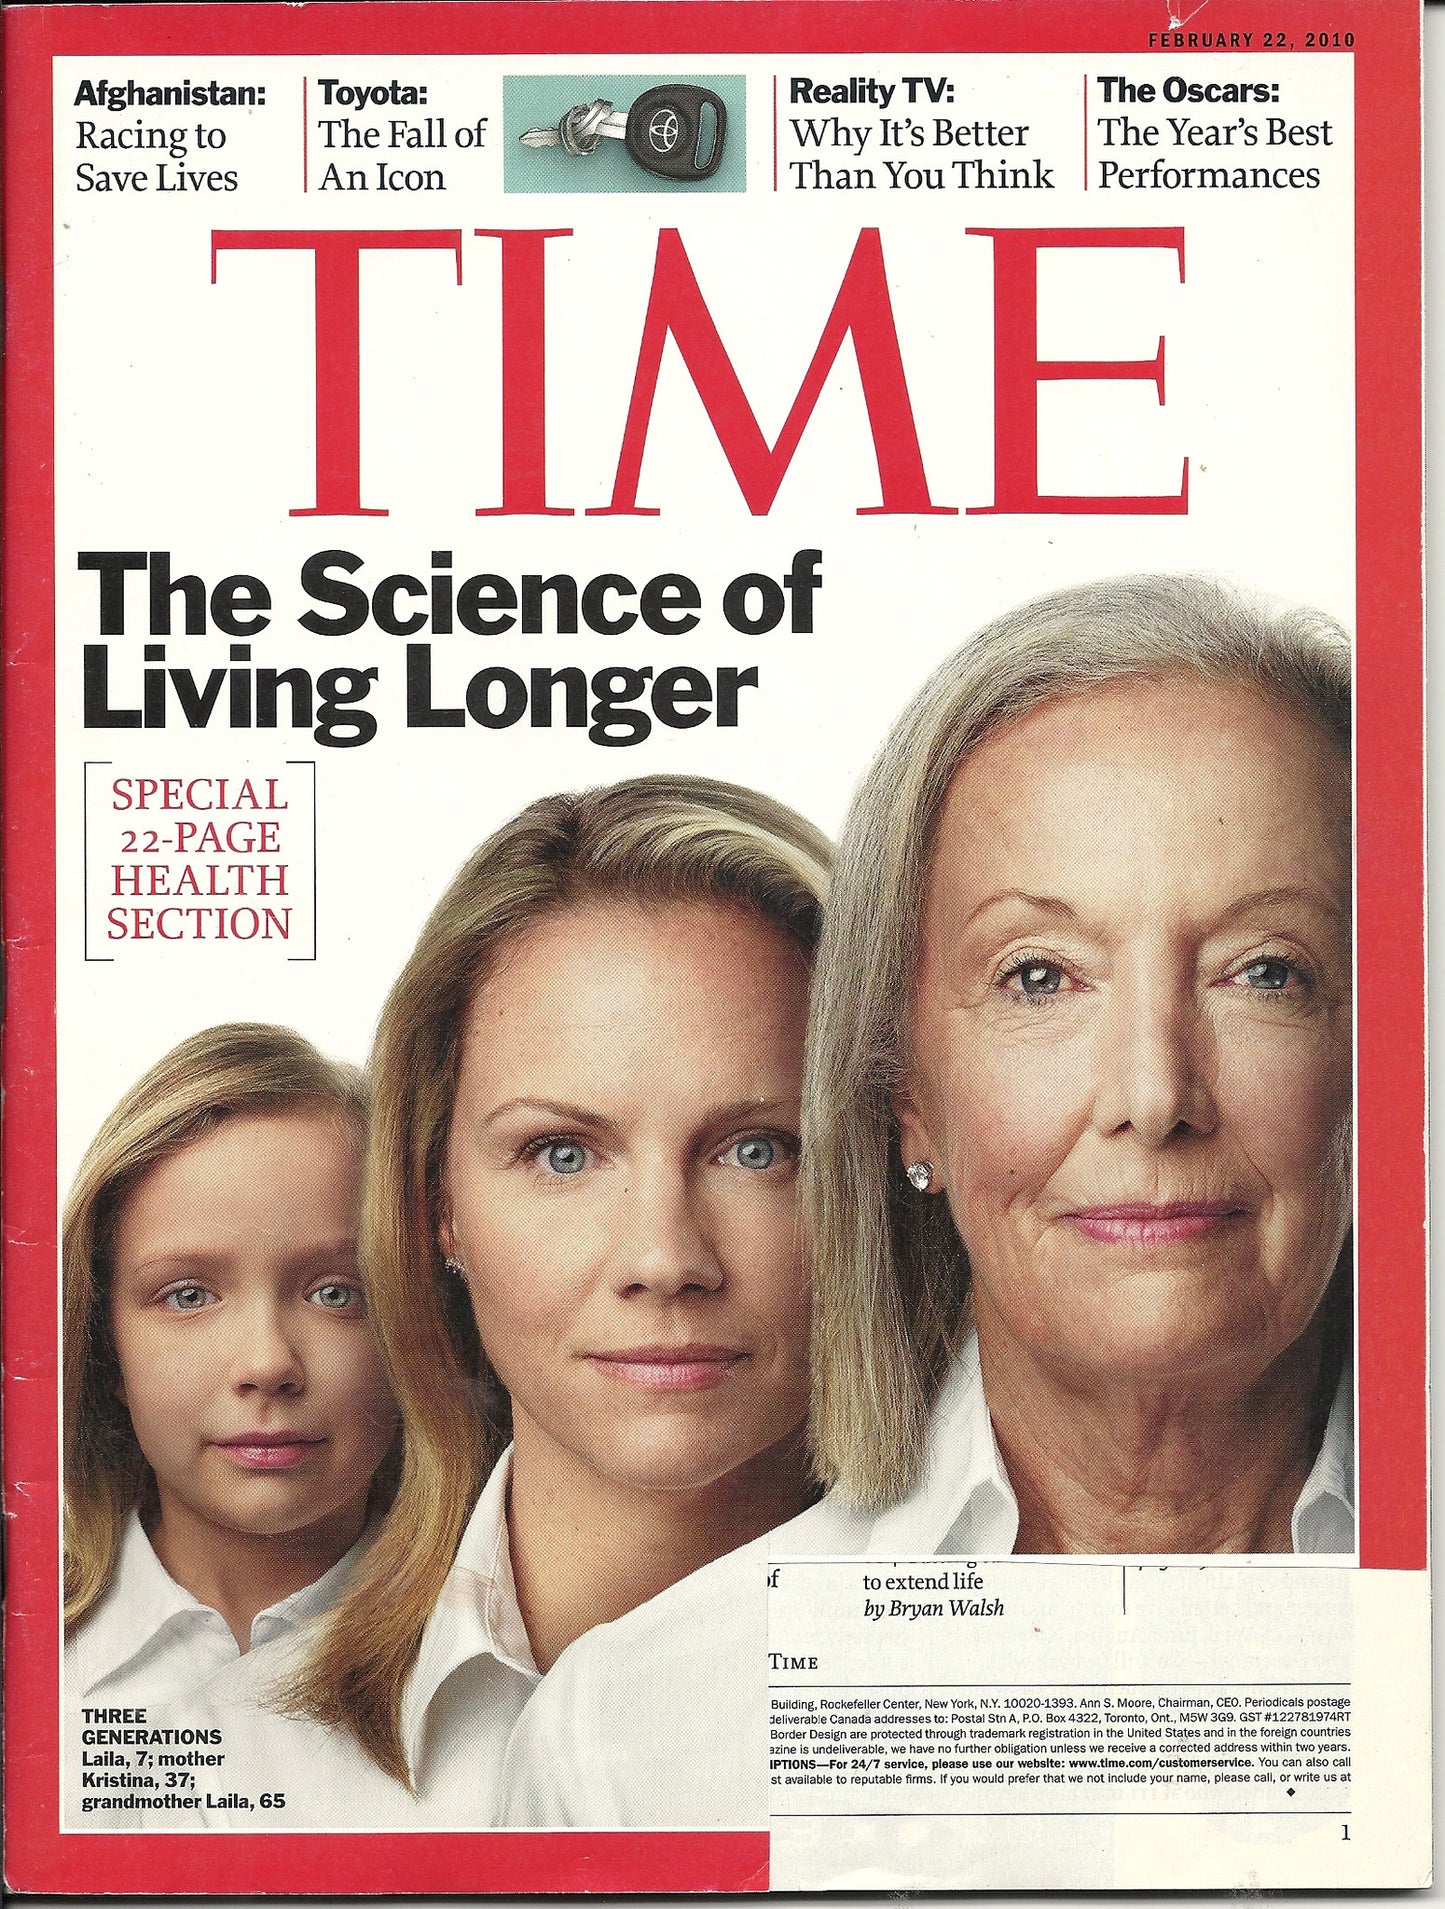 02 22 2010 Time The Science of Living Longer